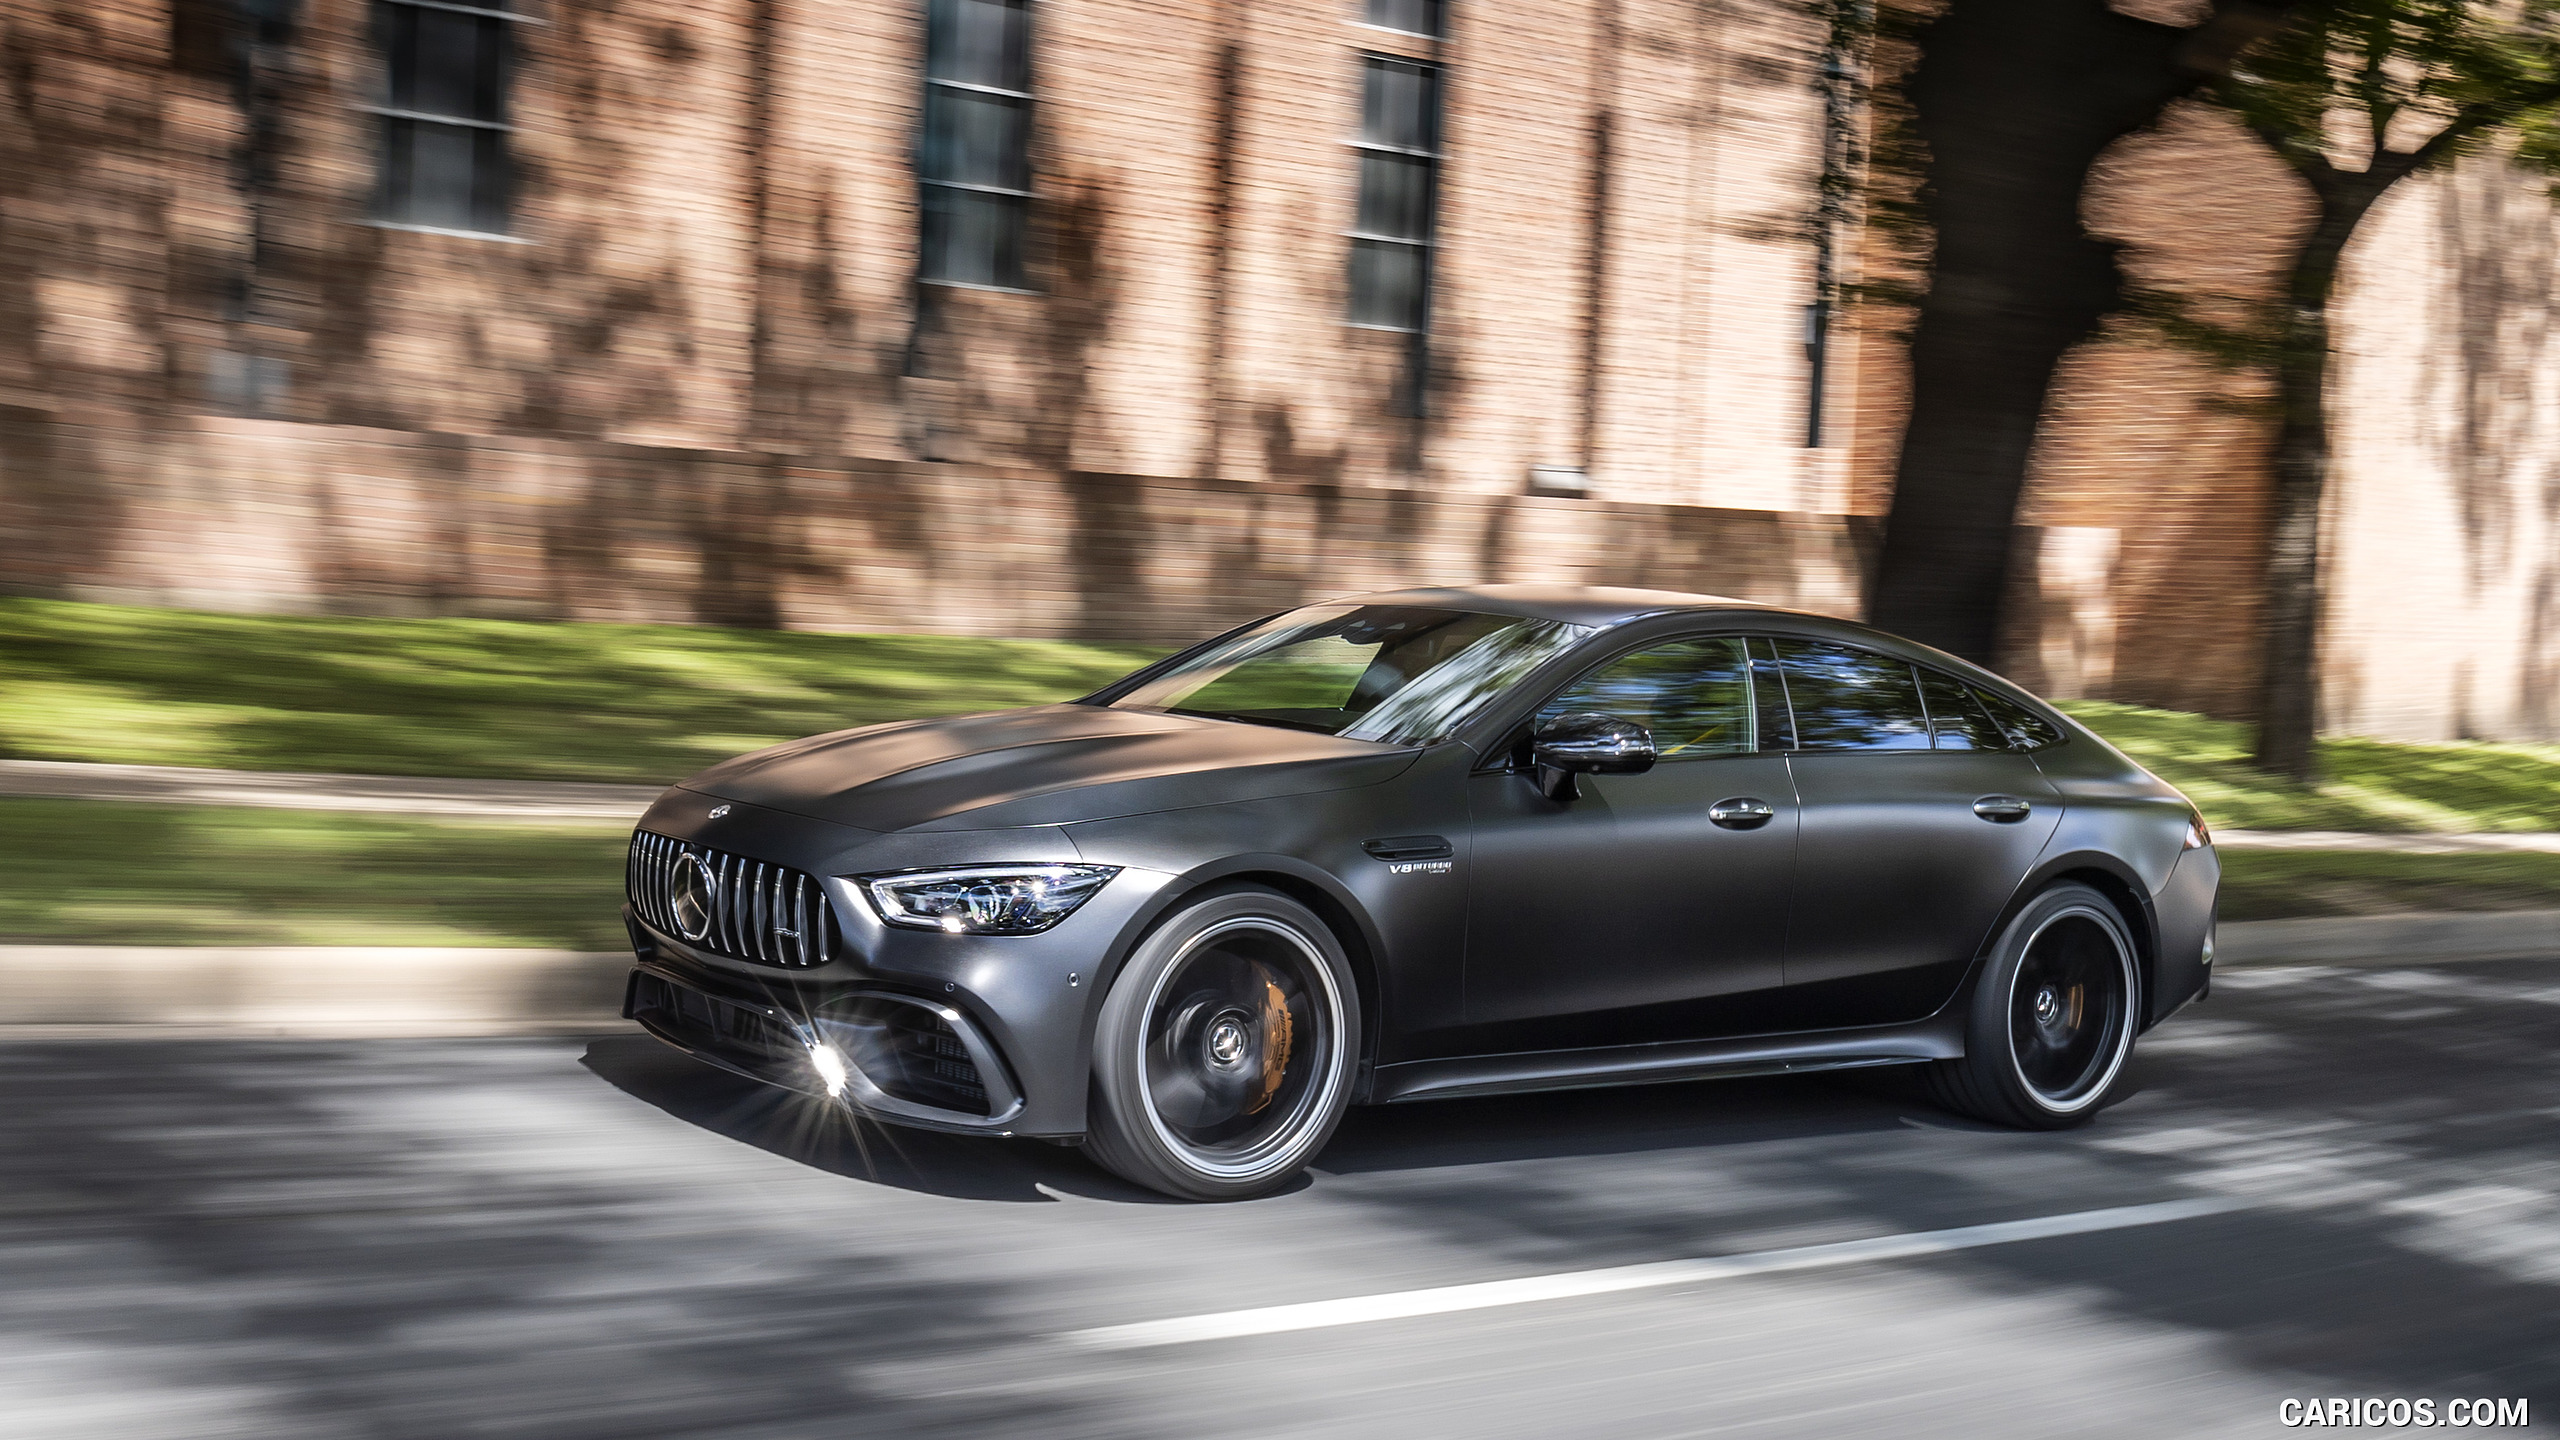 2019 Mercedes-AMG GT 63 S 4MATIC+ 4-Door Coupe - Front Three-Quarter, #204 of 427